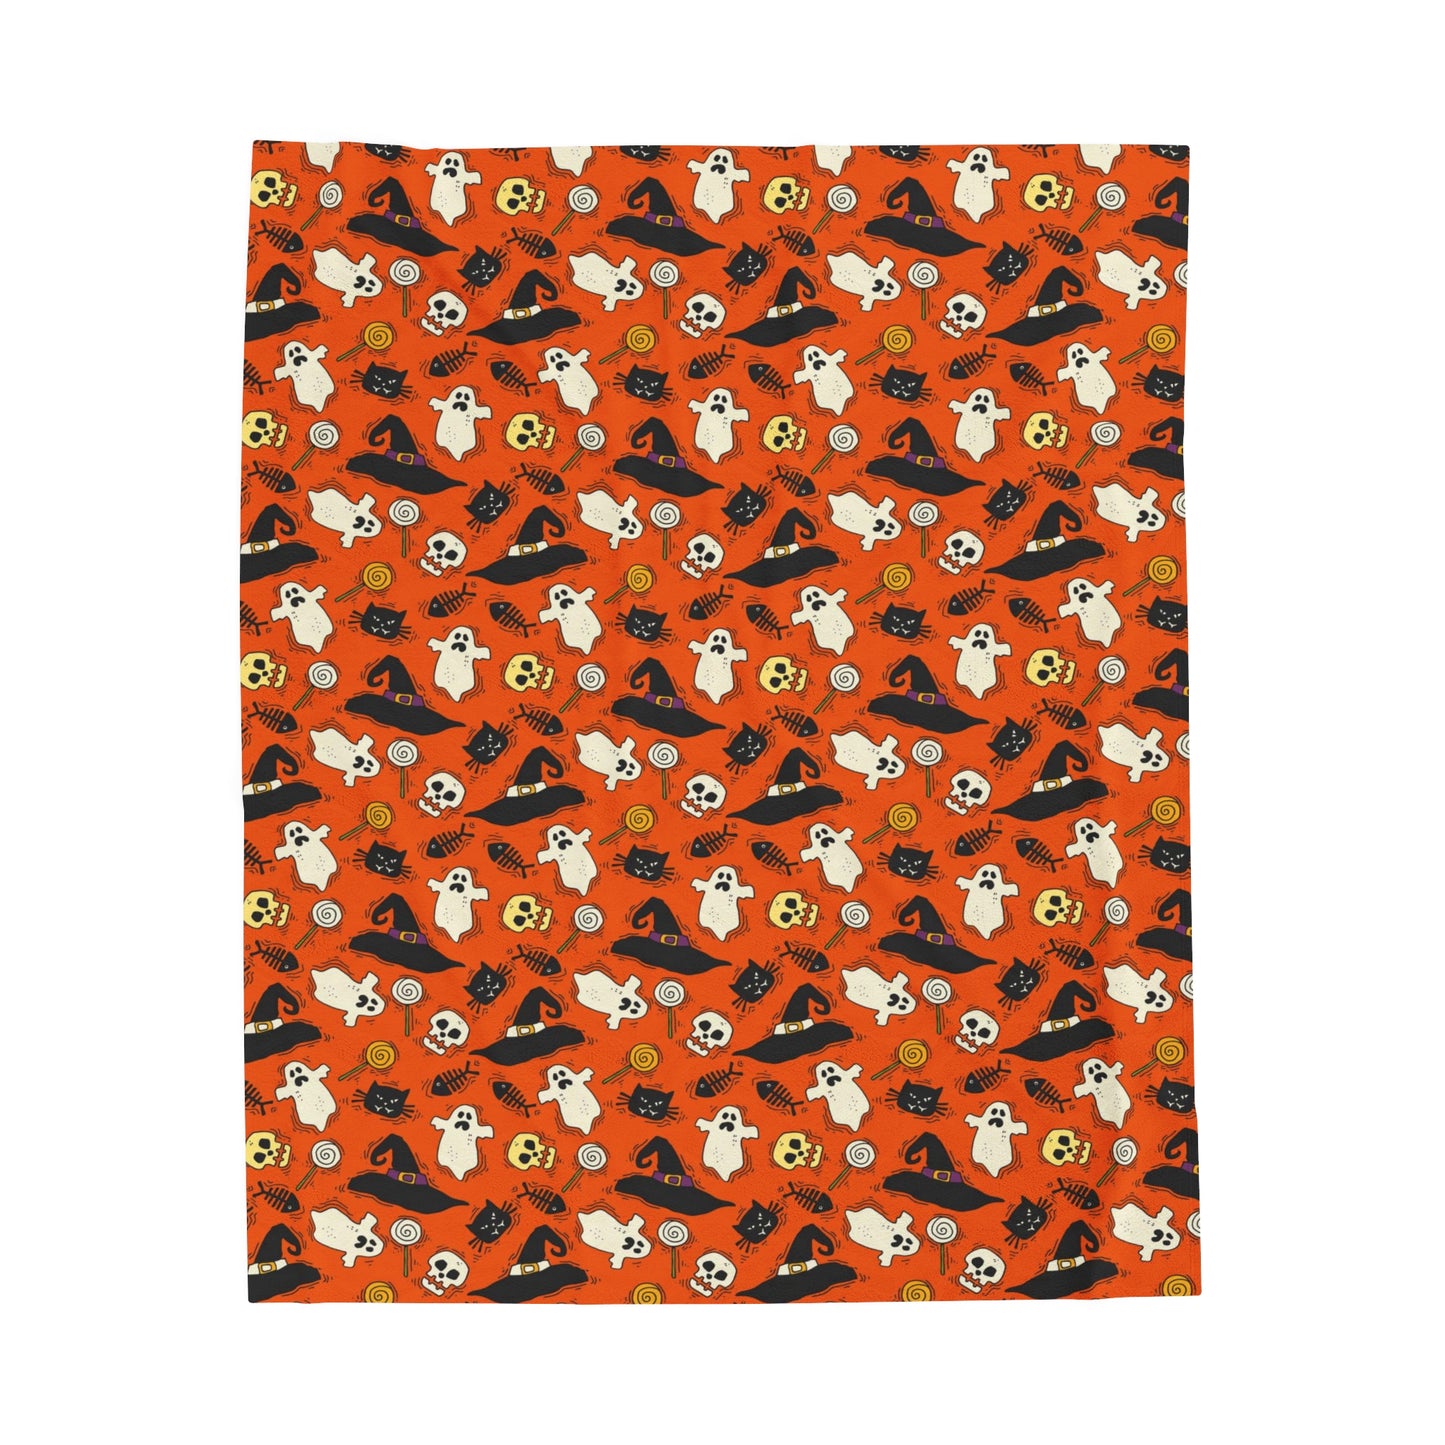 Halloween Fleece Throw Blanket, Orange Ghosts Witch Cat Velveteen Soft Plush Fluffy Cozy Warm Adult Kids Small Large Sofa Bed Décor Starcove Fashion